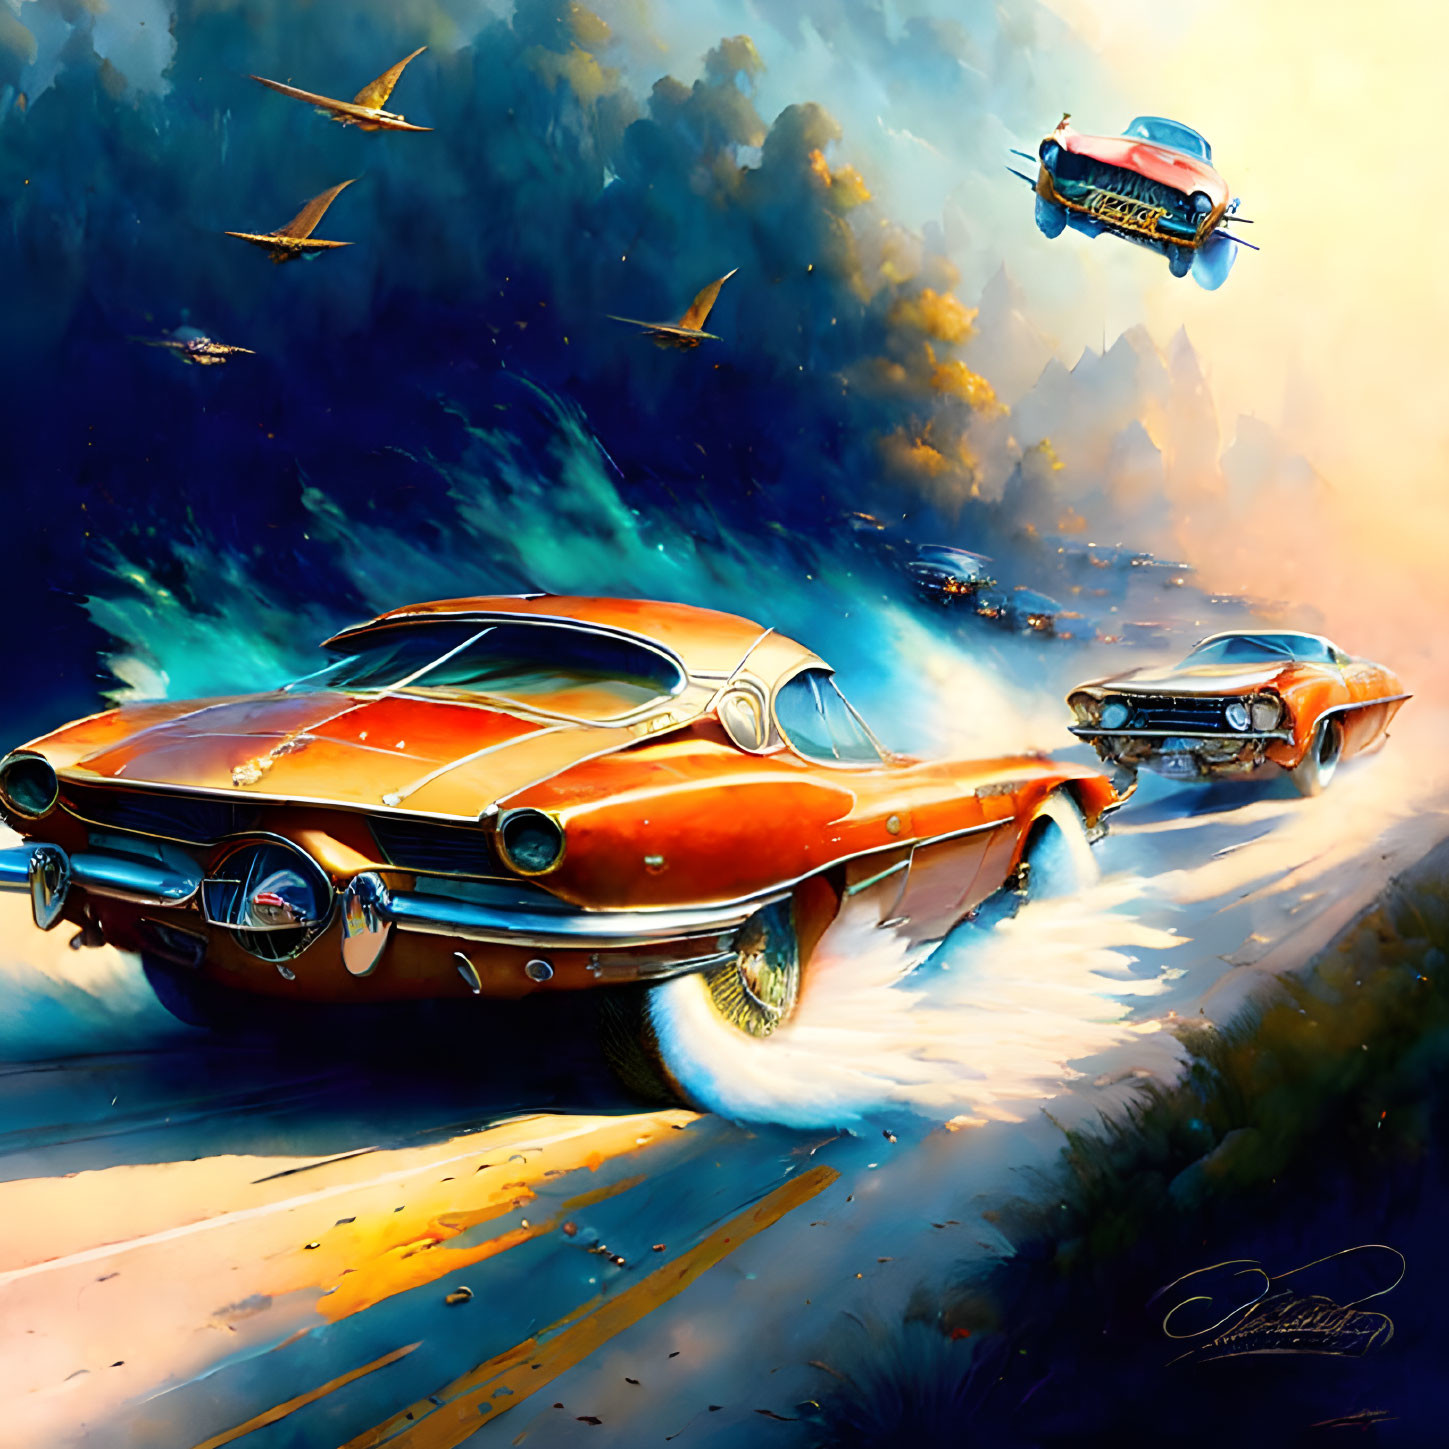 Vintage cars flying in retro-futuristic illustration over dreamy skyline